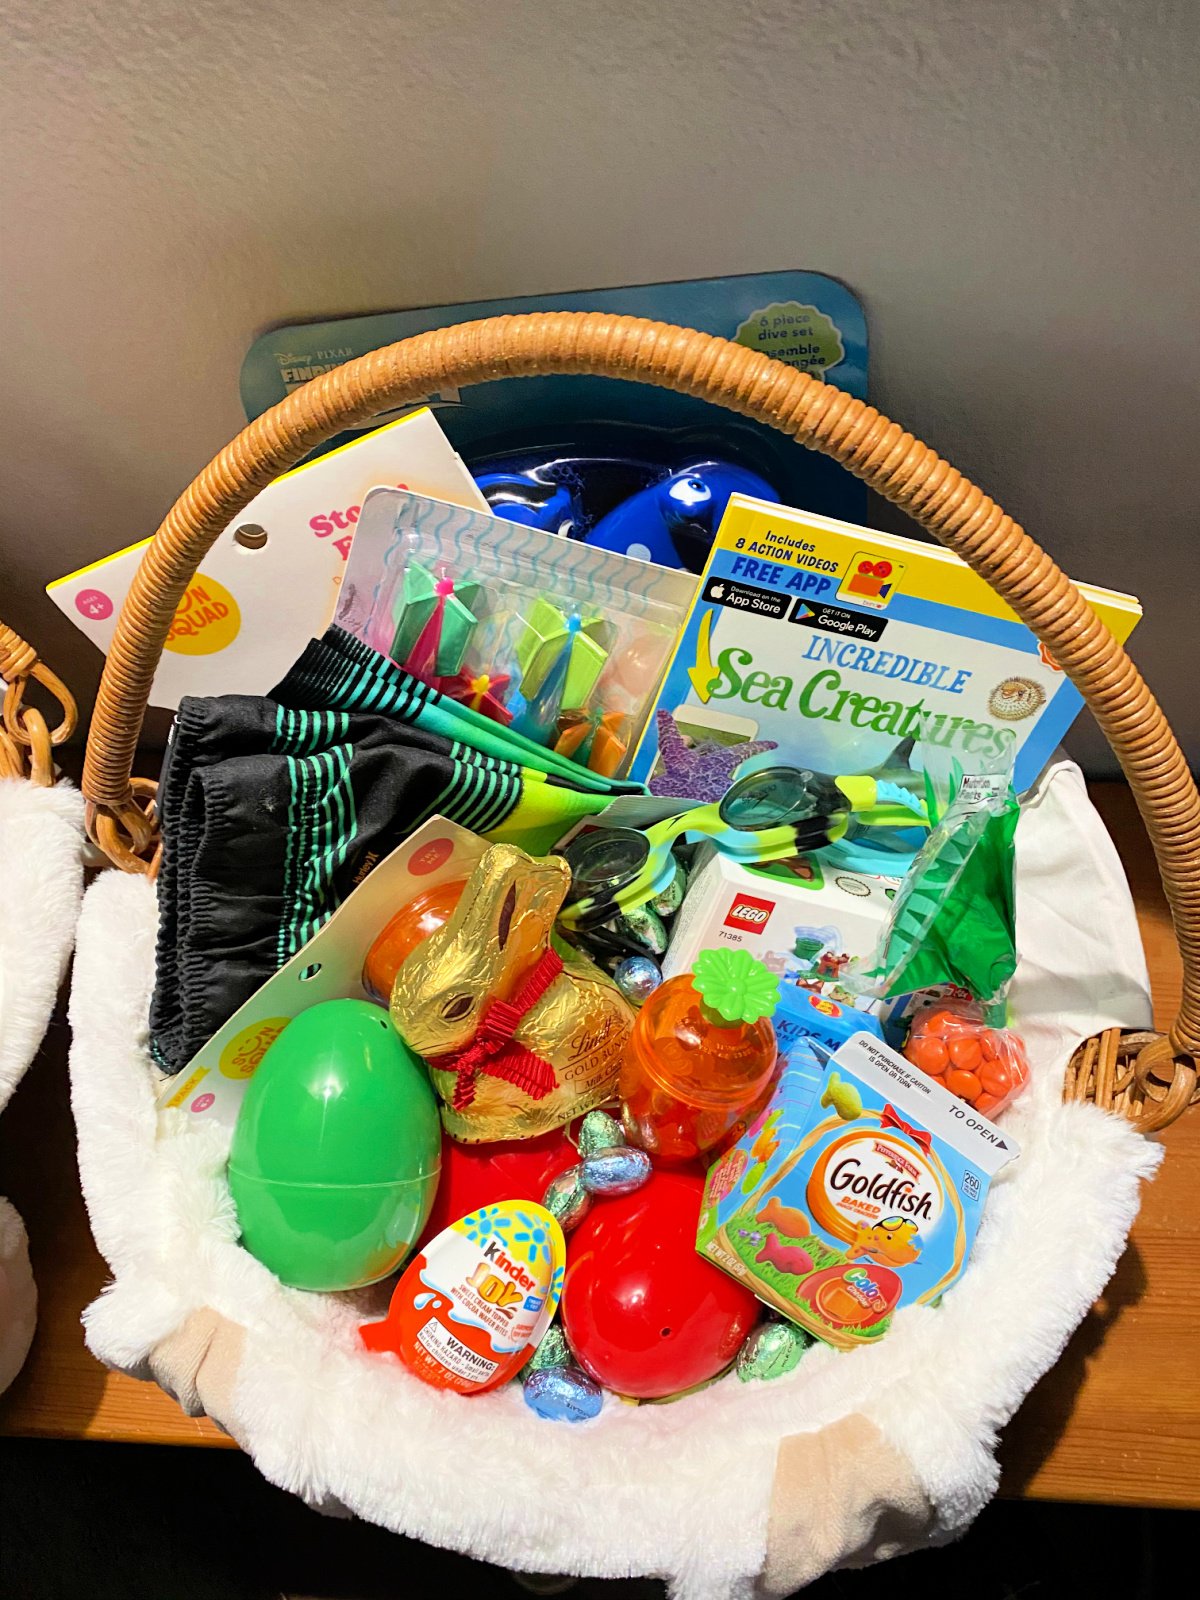 Easter basket with plastic eggs, candy, snacks, clothing, books, and water toys.